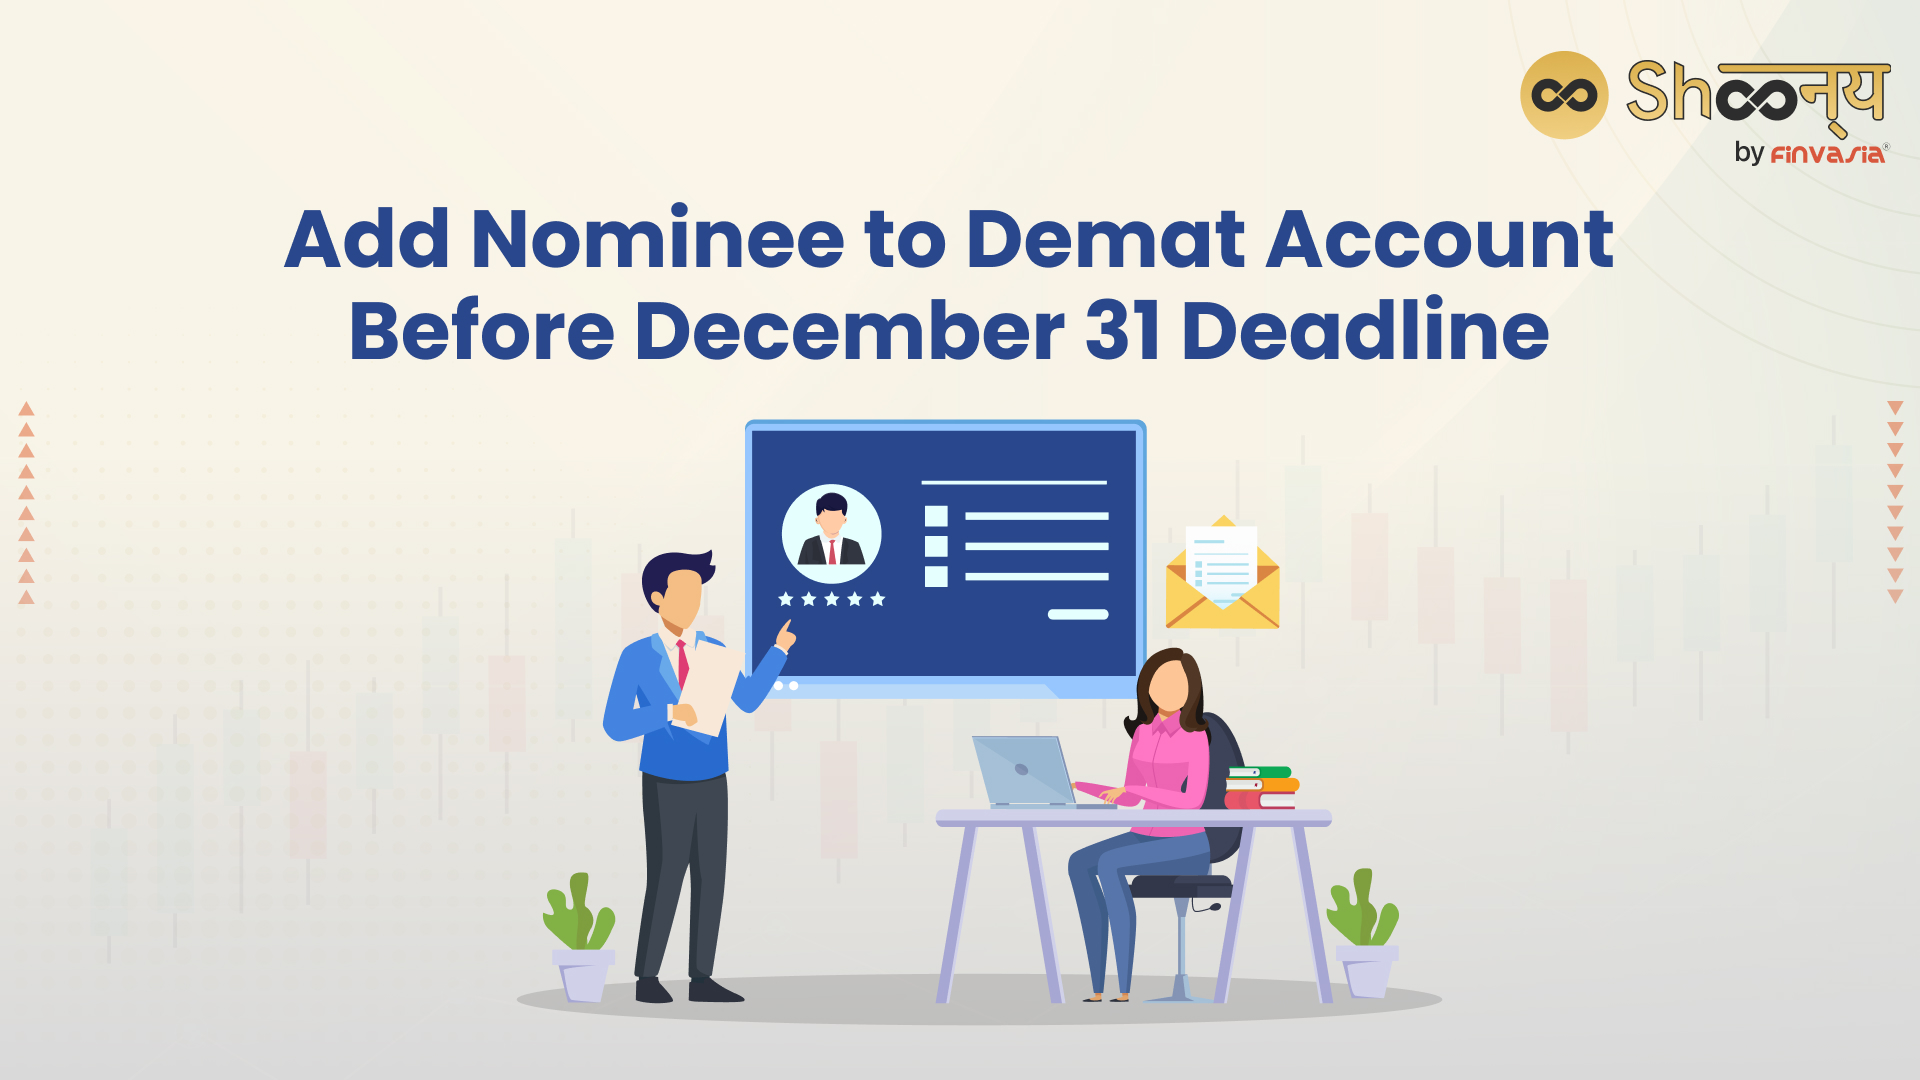 Last Date to Add Nominee in Demat Account - December 31